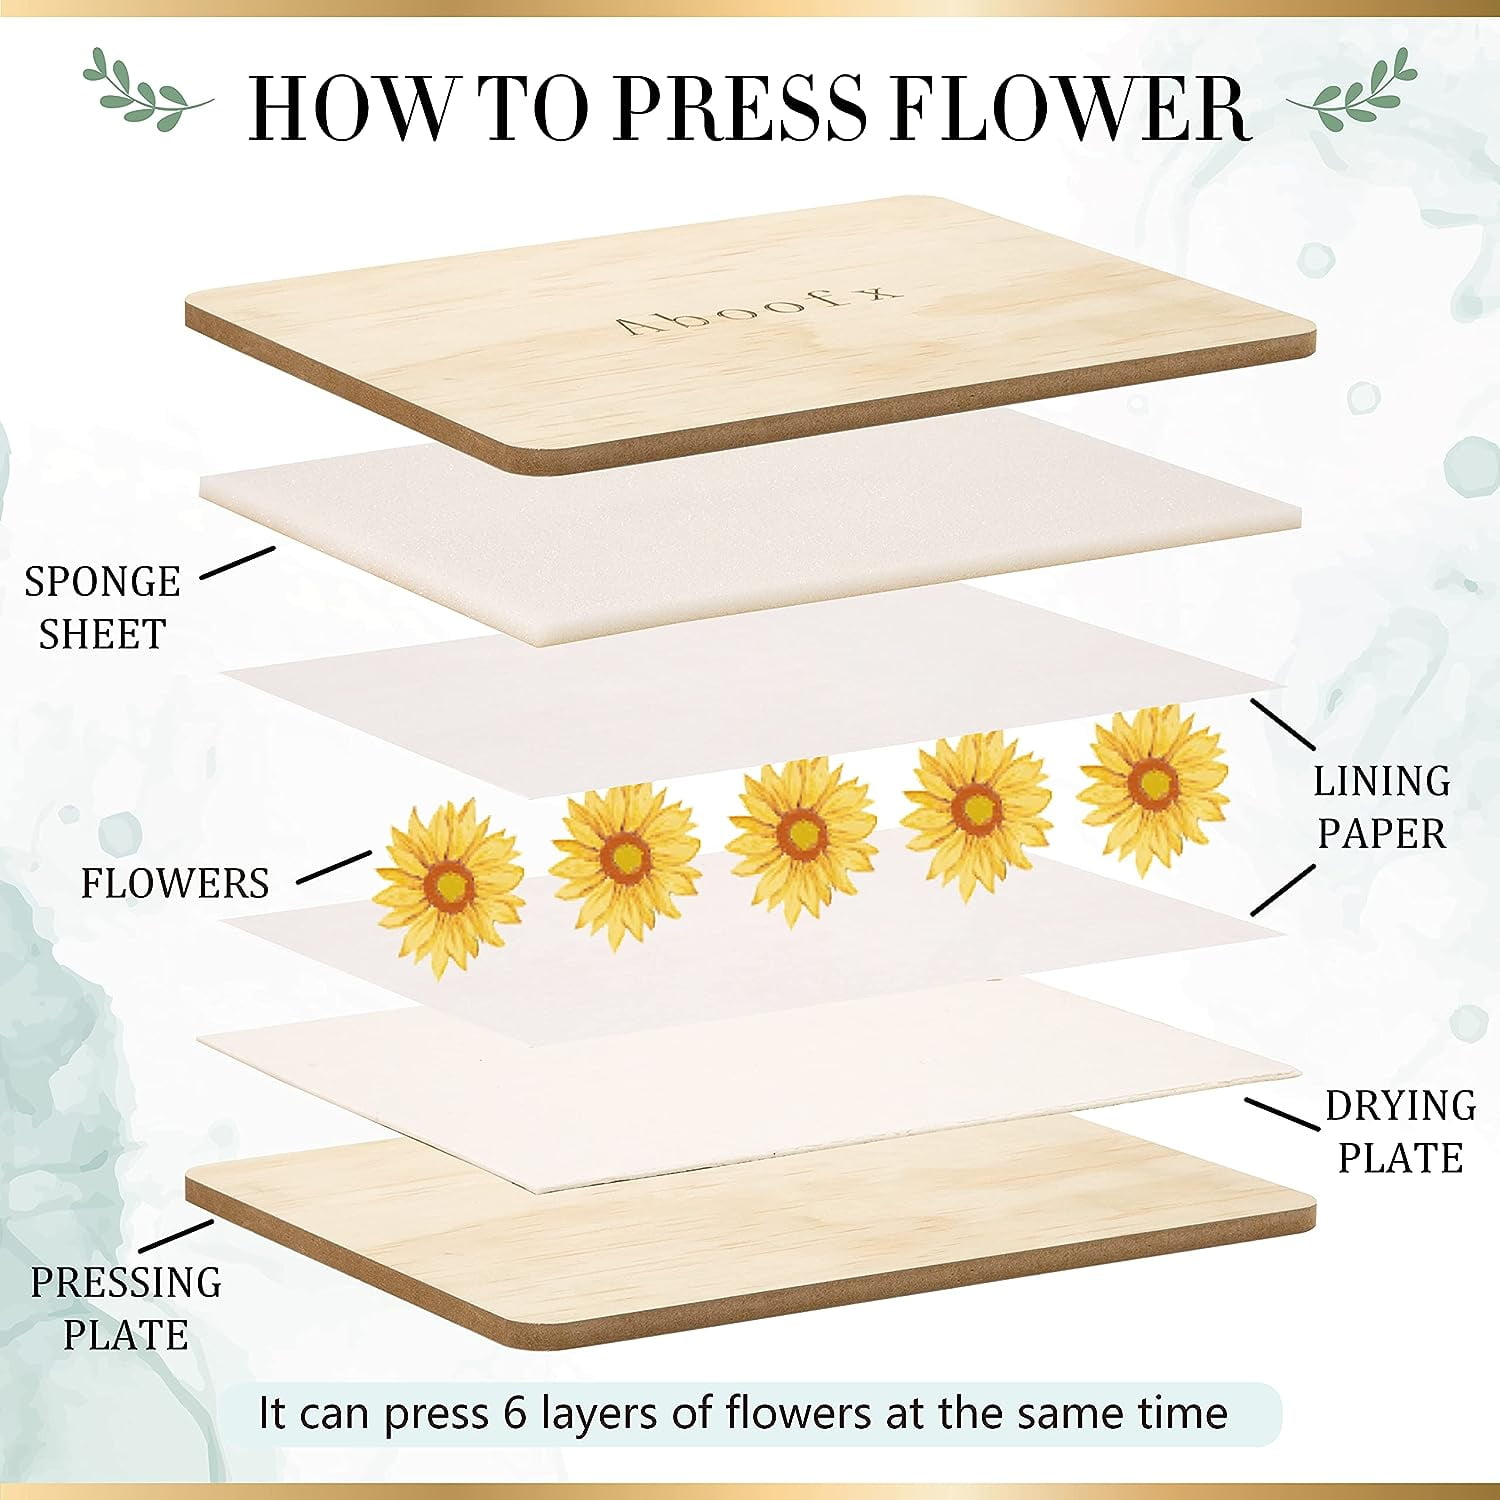 Buy THE WHITE SHOP Large Flower Press Kit for Adults The Flower  Preservation Kit Measures 8.3 x 6.3 • Our Press & Leaf Press is a Great  Gift for Arts and Crafts